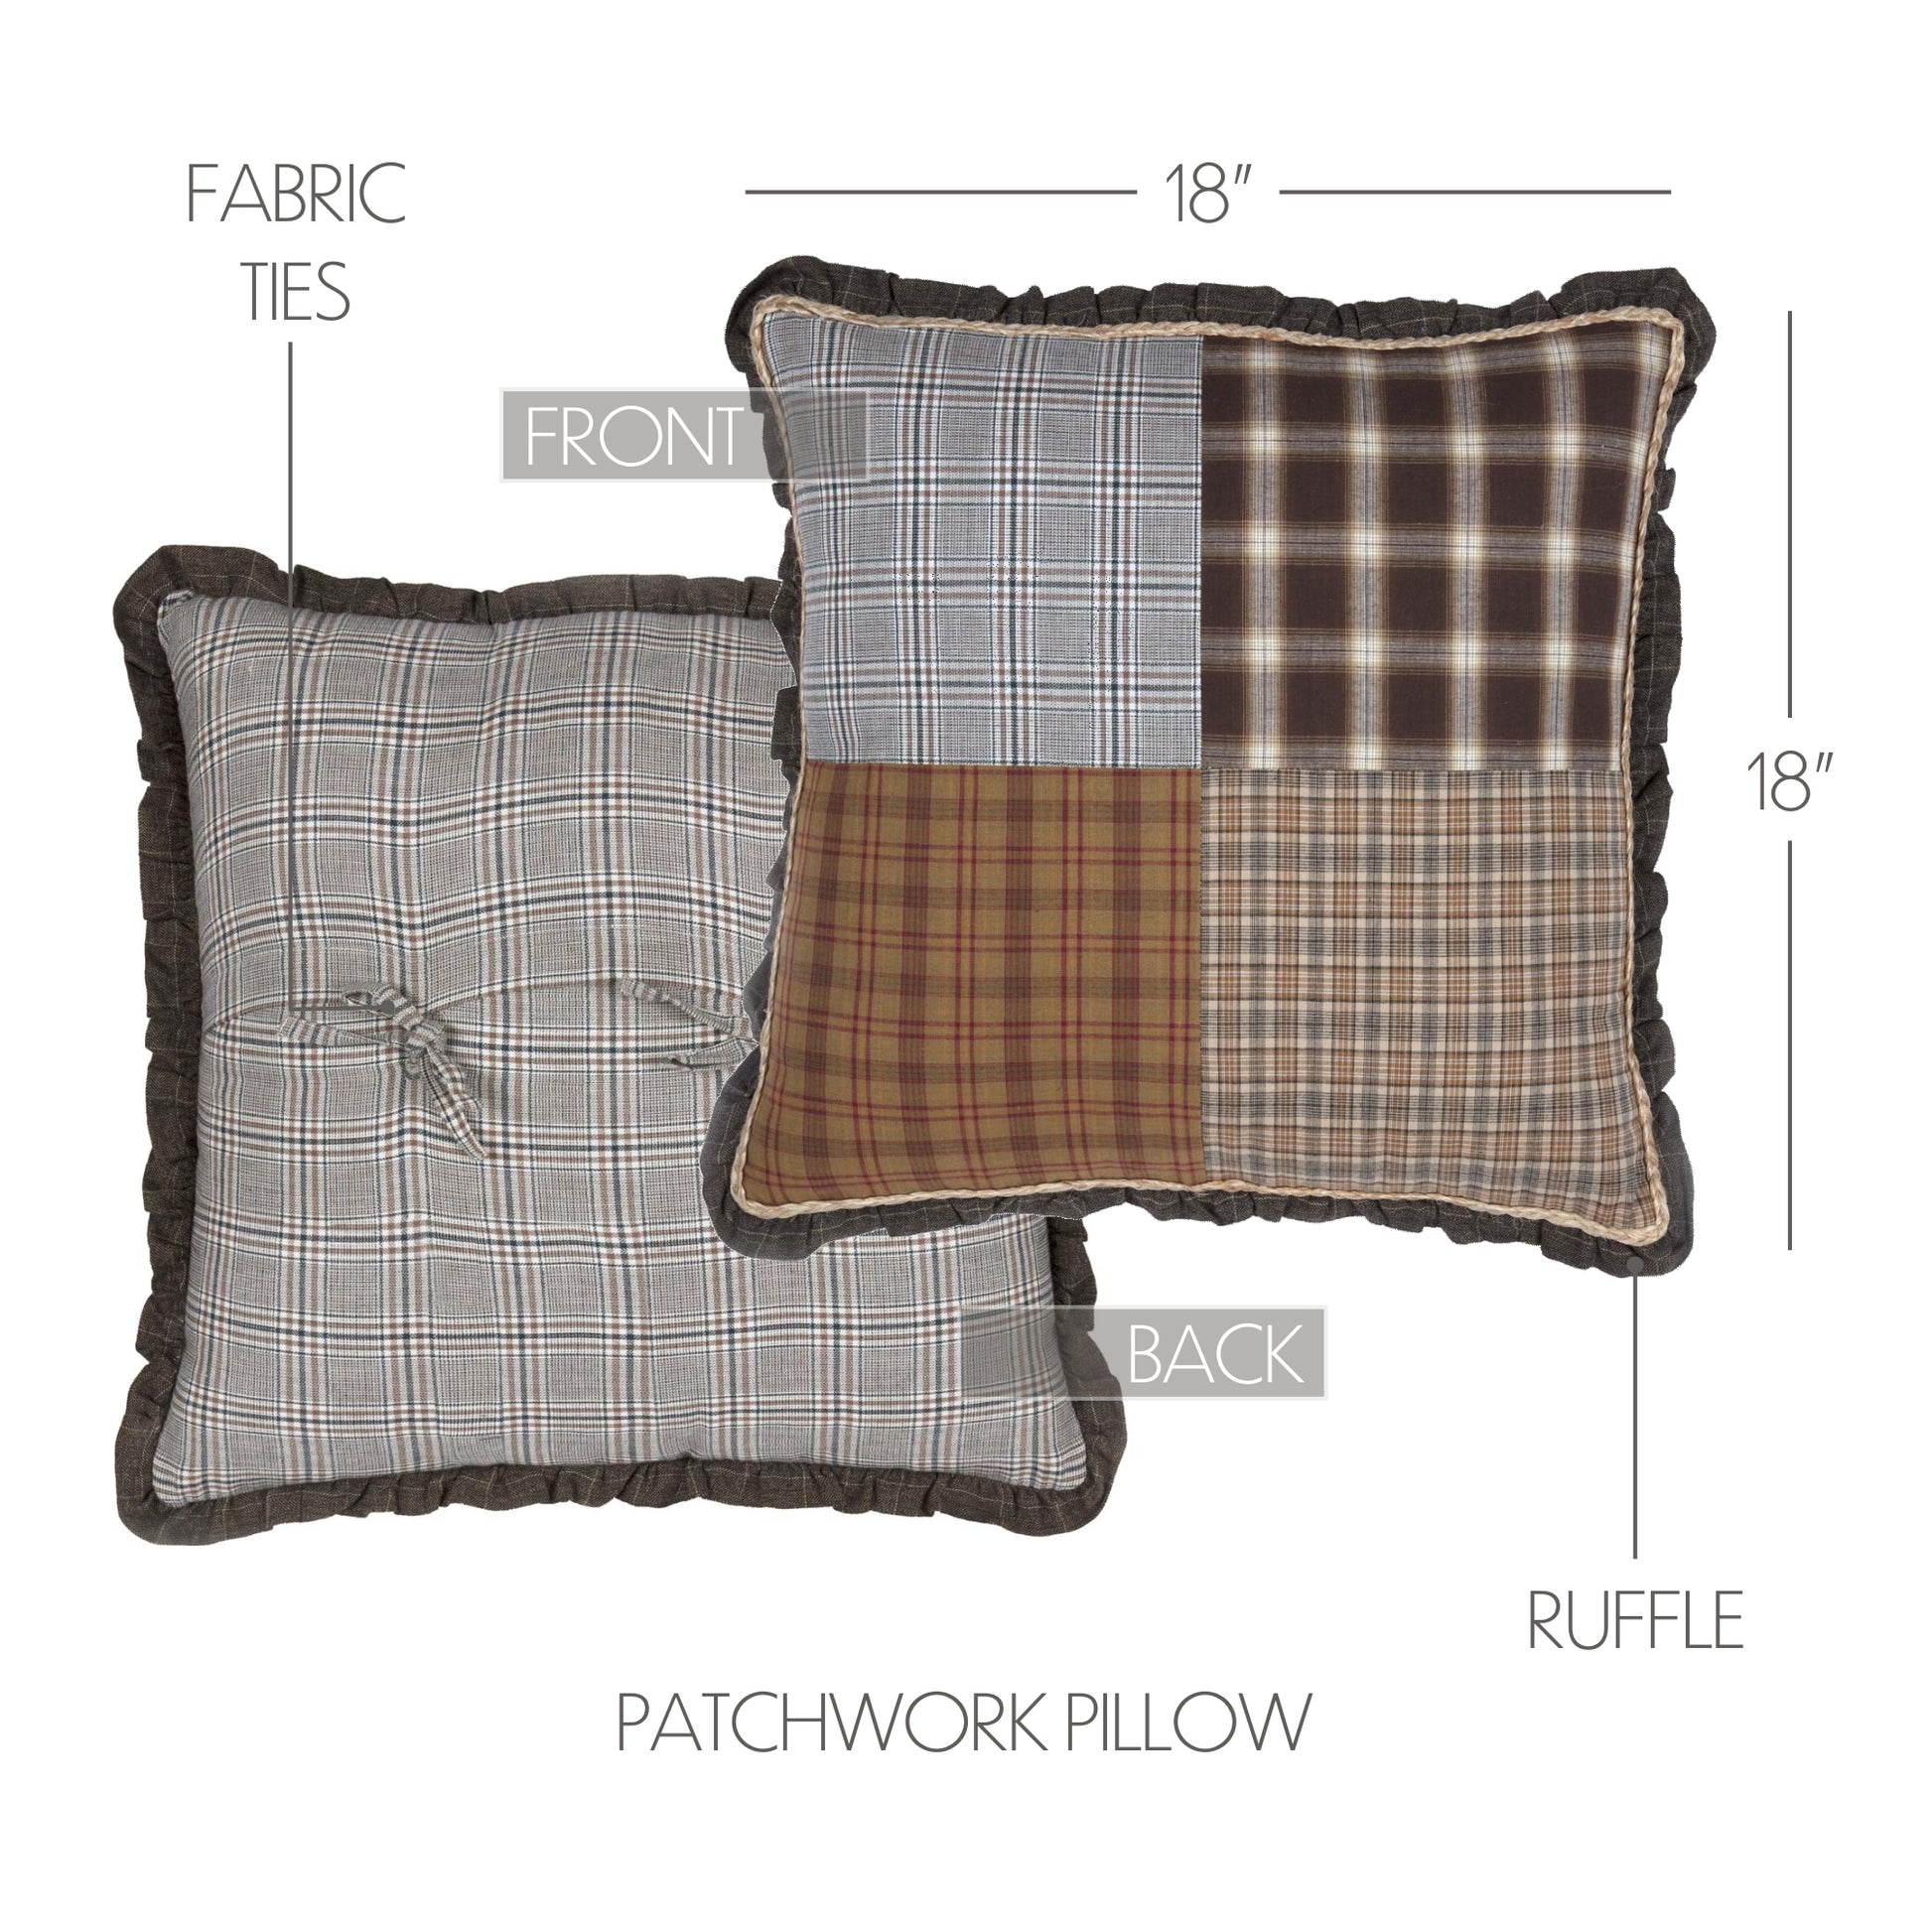 34396-Rory-Patchwork-Pillow-18x18-image-1